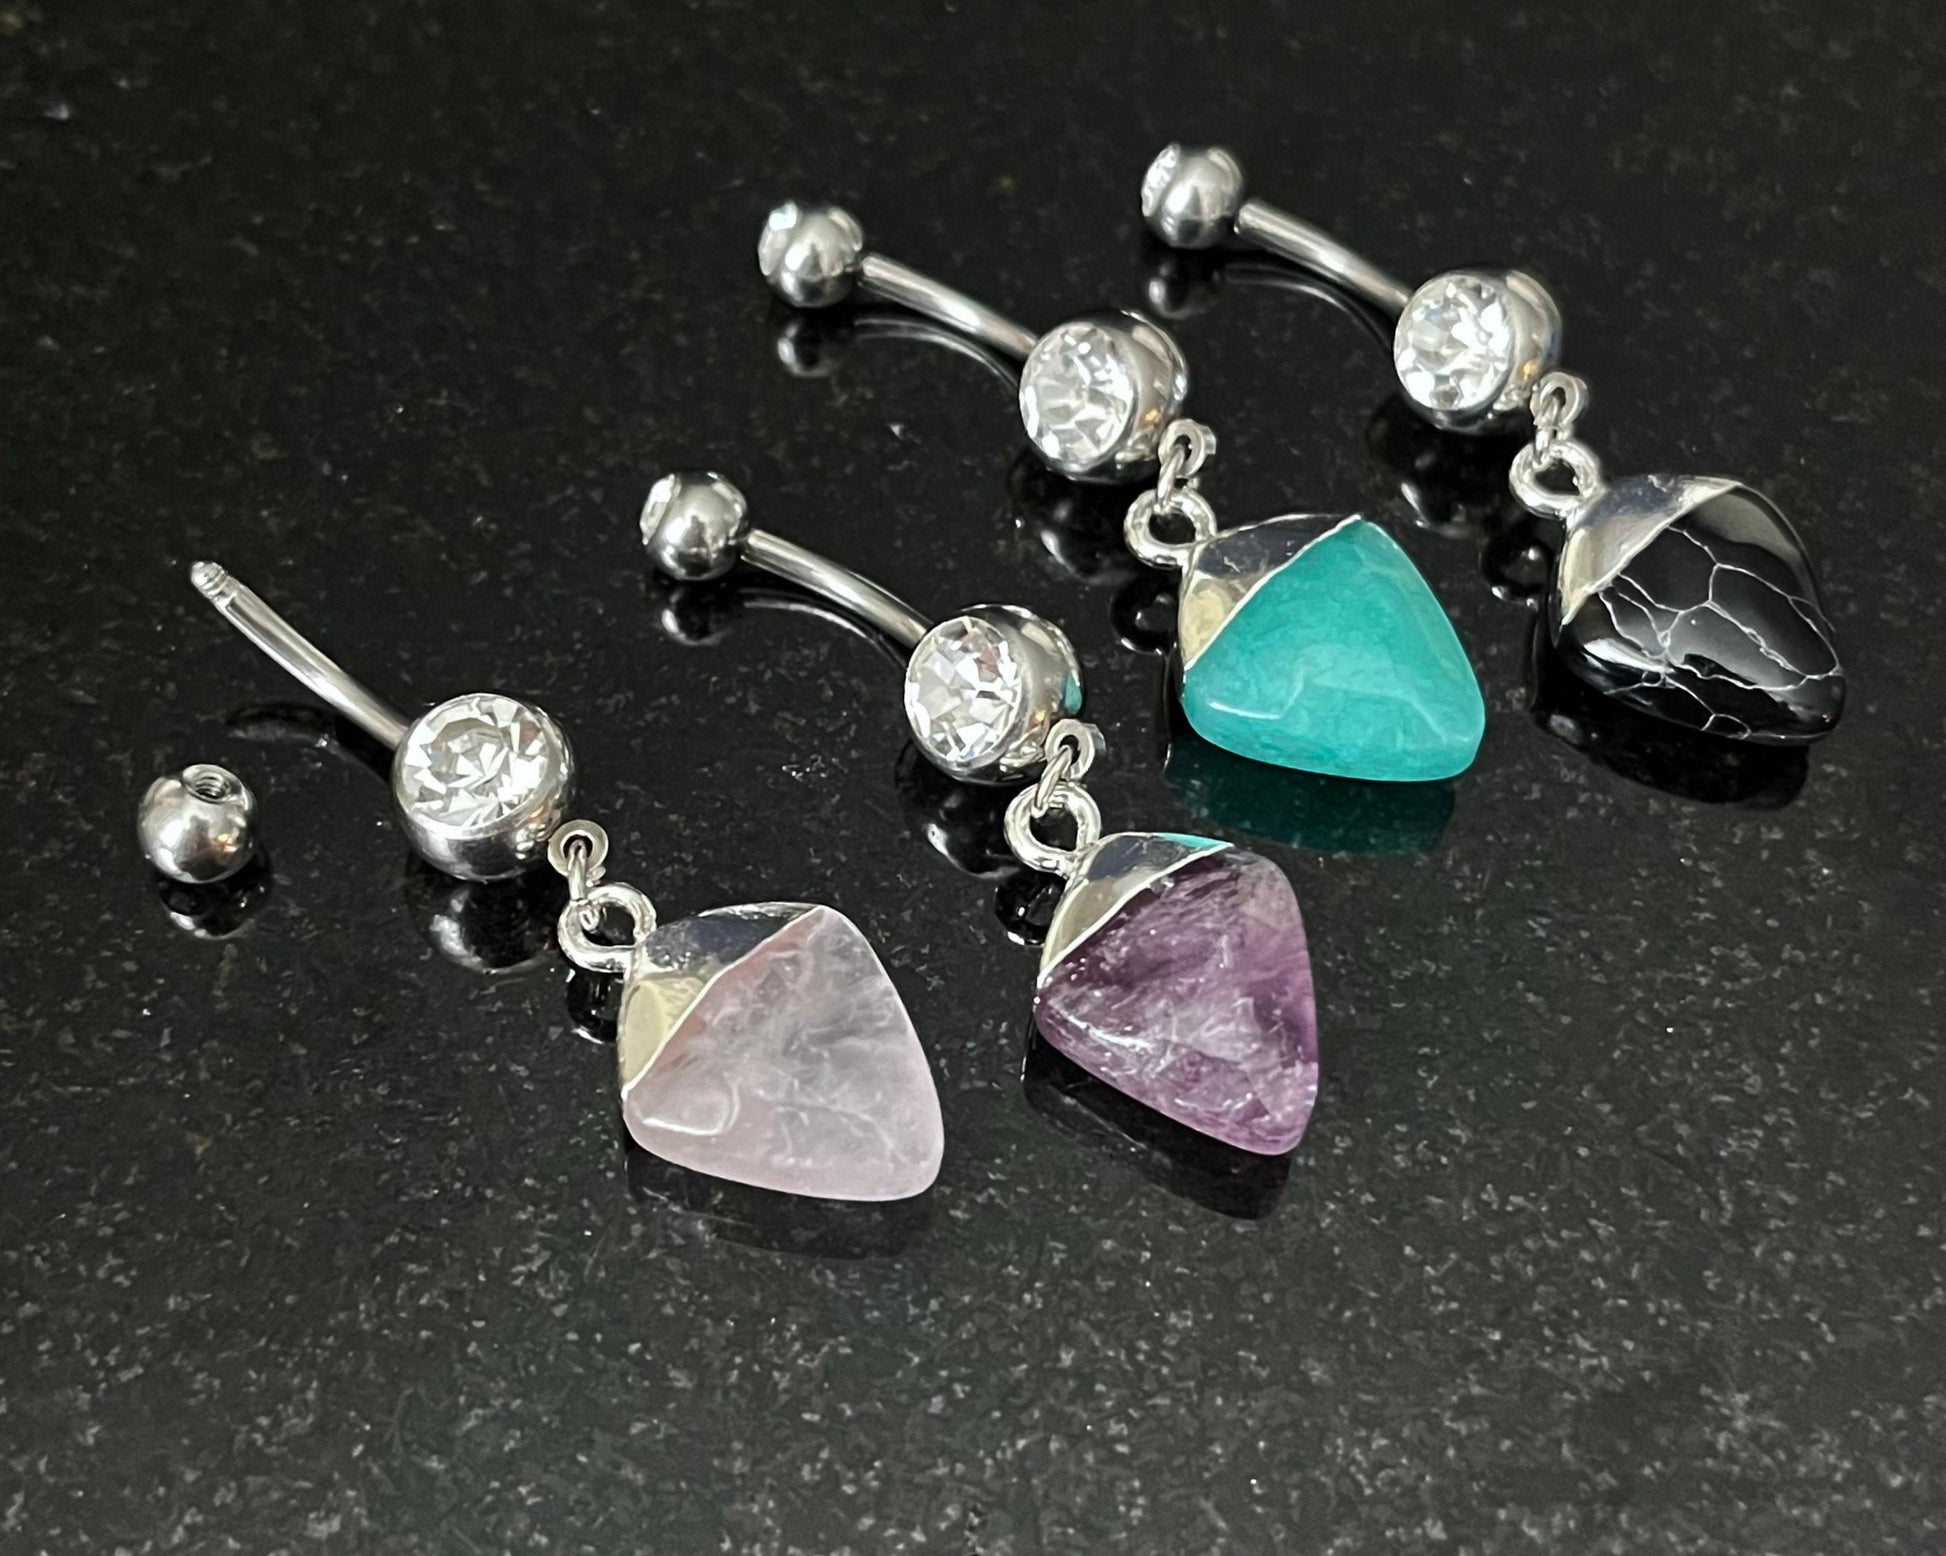 1 Piece Stunning Double Gem Stone Dangle Navel / Naval Belly Ring - 14g - 10mm - Amethyst, Green Jade, Black Agate & Clear Quartz Available!